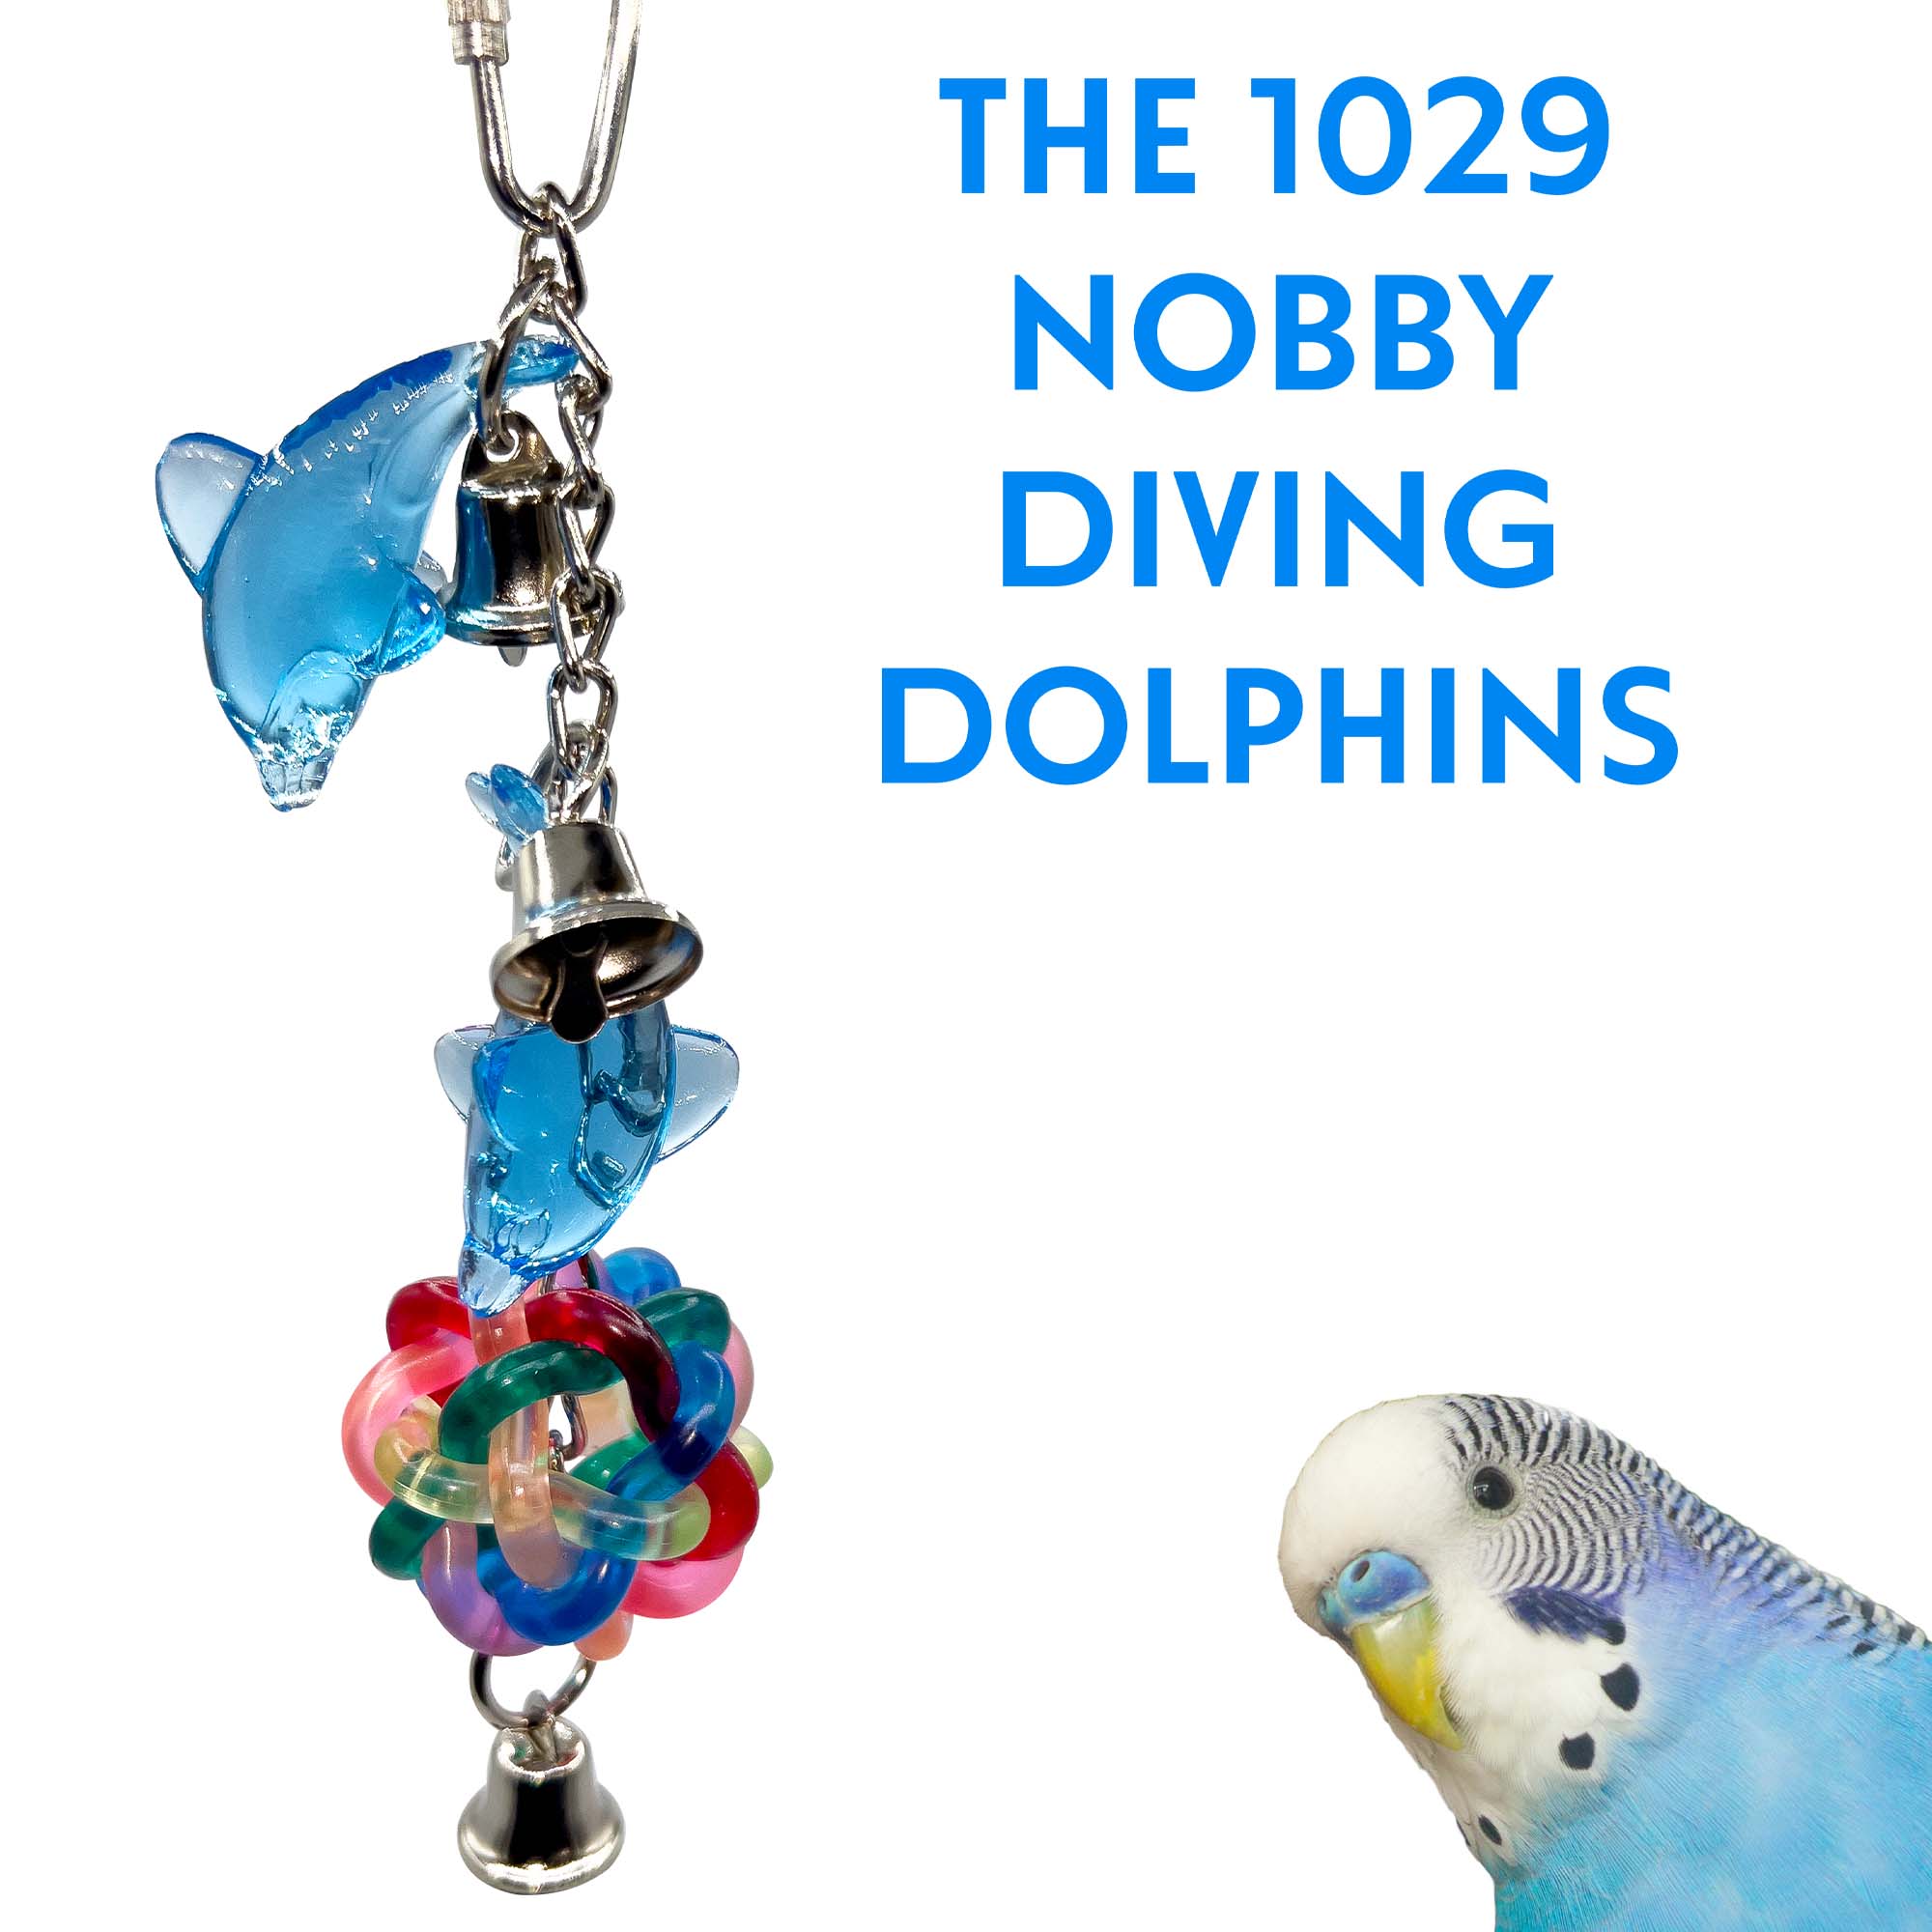 1029 Nobby Diving Dolphins